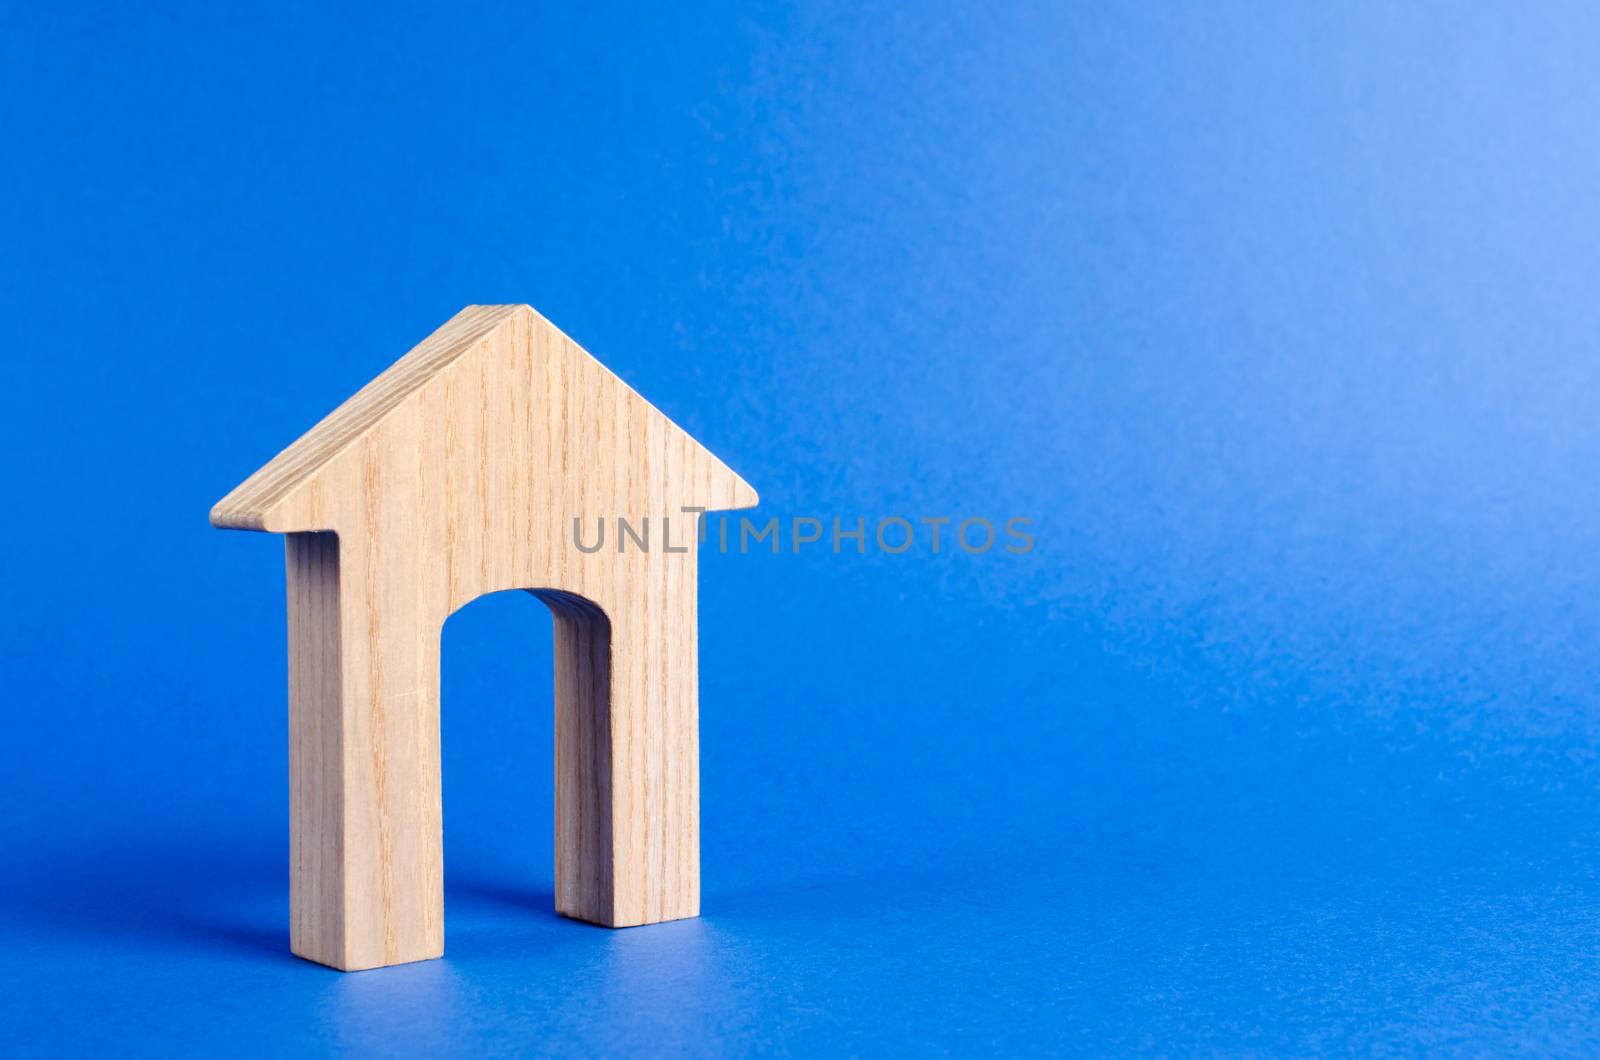 Wooden figure of a house with a large doorway on blue background. concept of buying and selling real estate, rent, investment. Home, Affordable housing, residential building. Construction buildings.